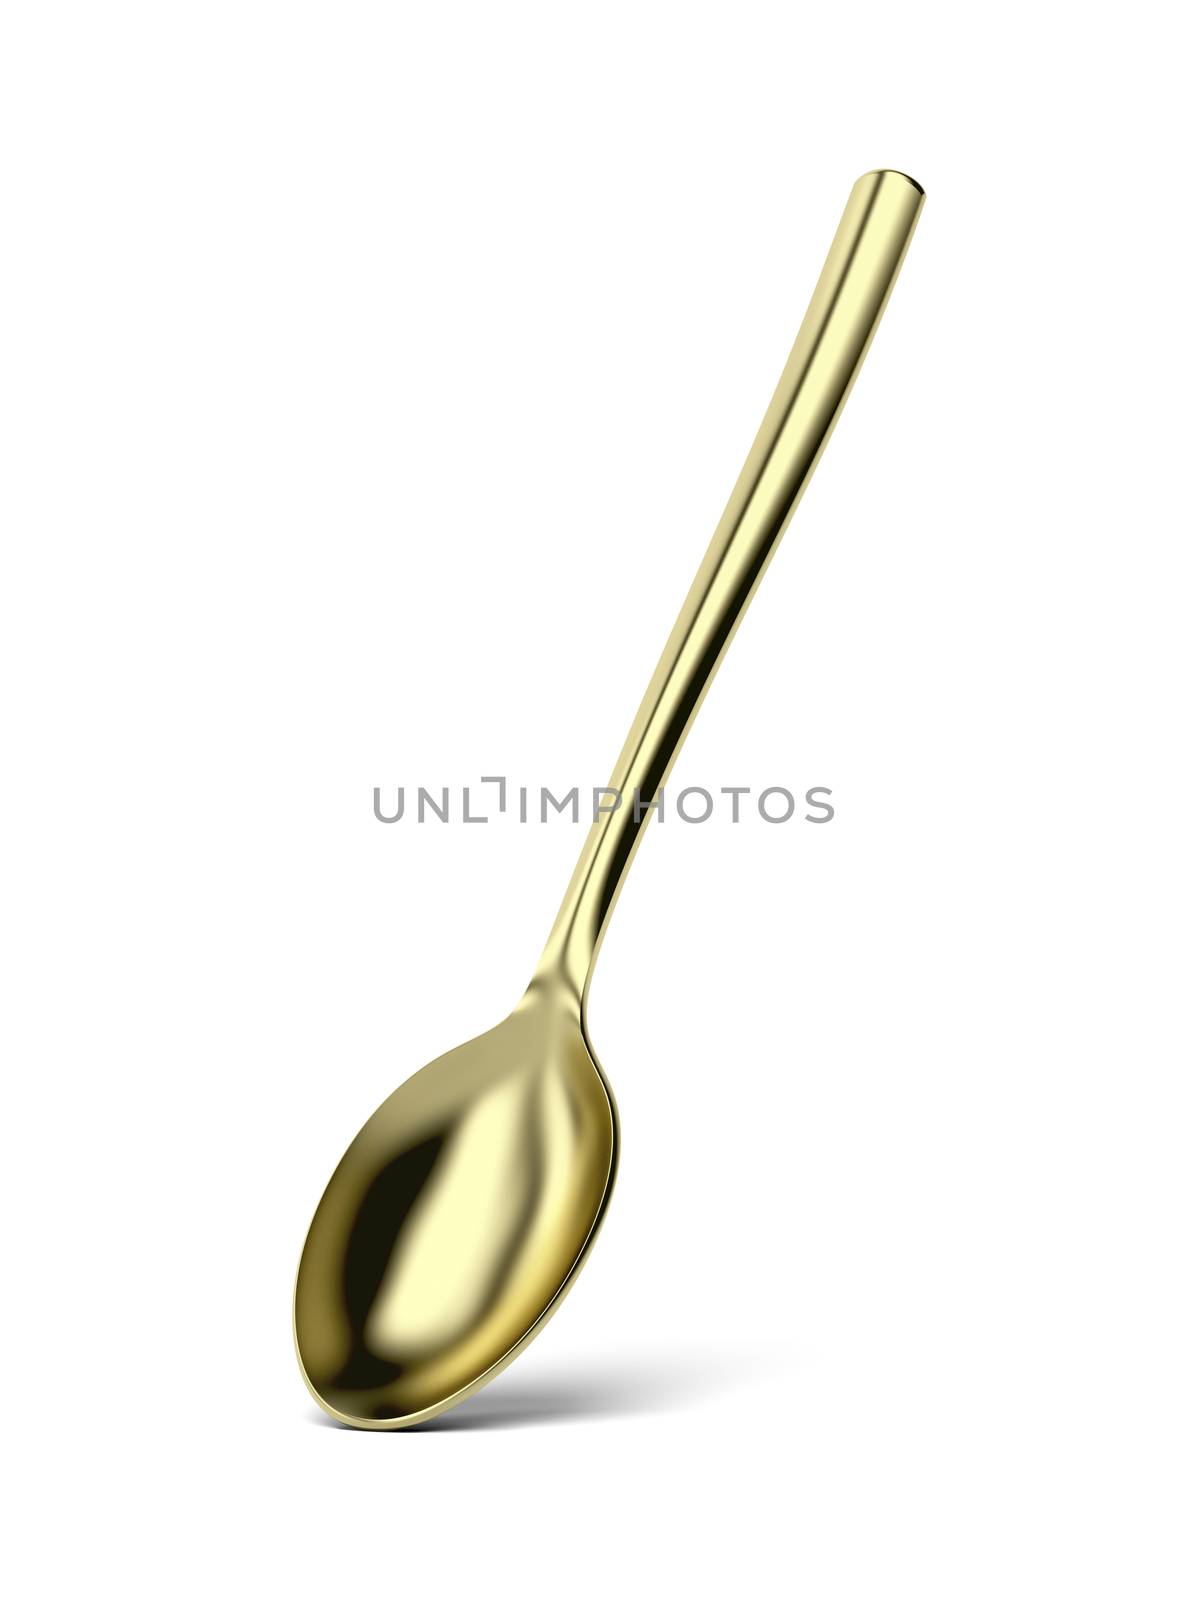 Golden spoon by magraphics